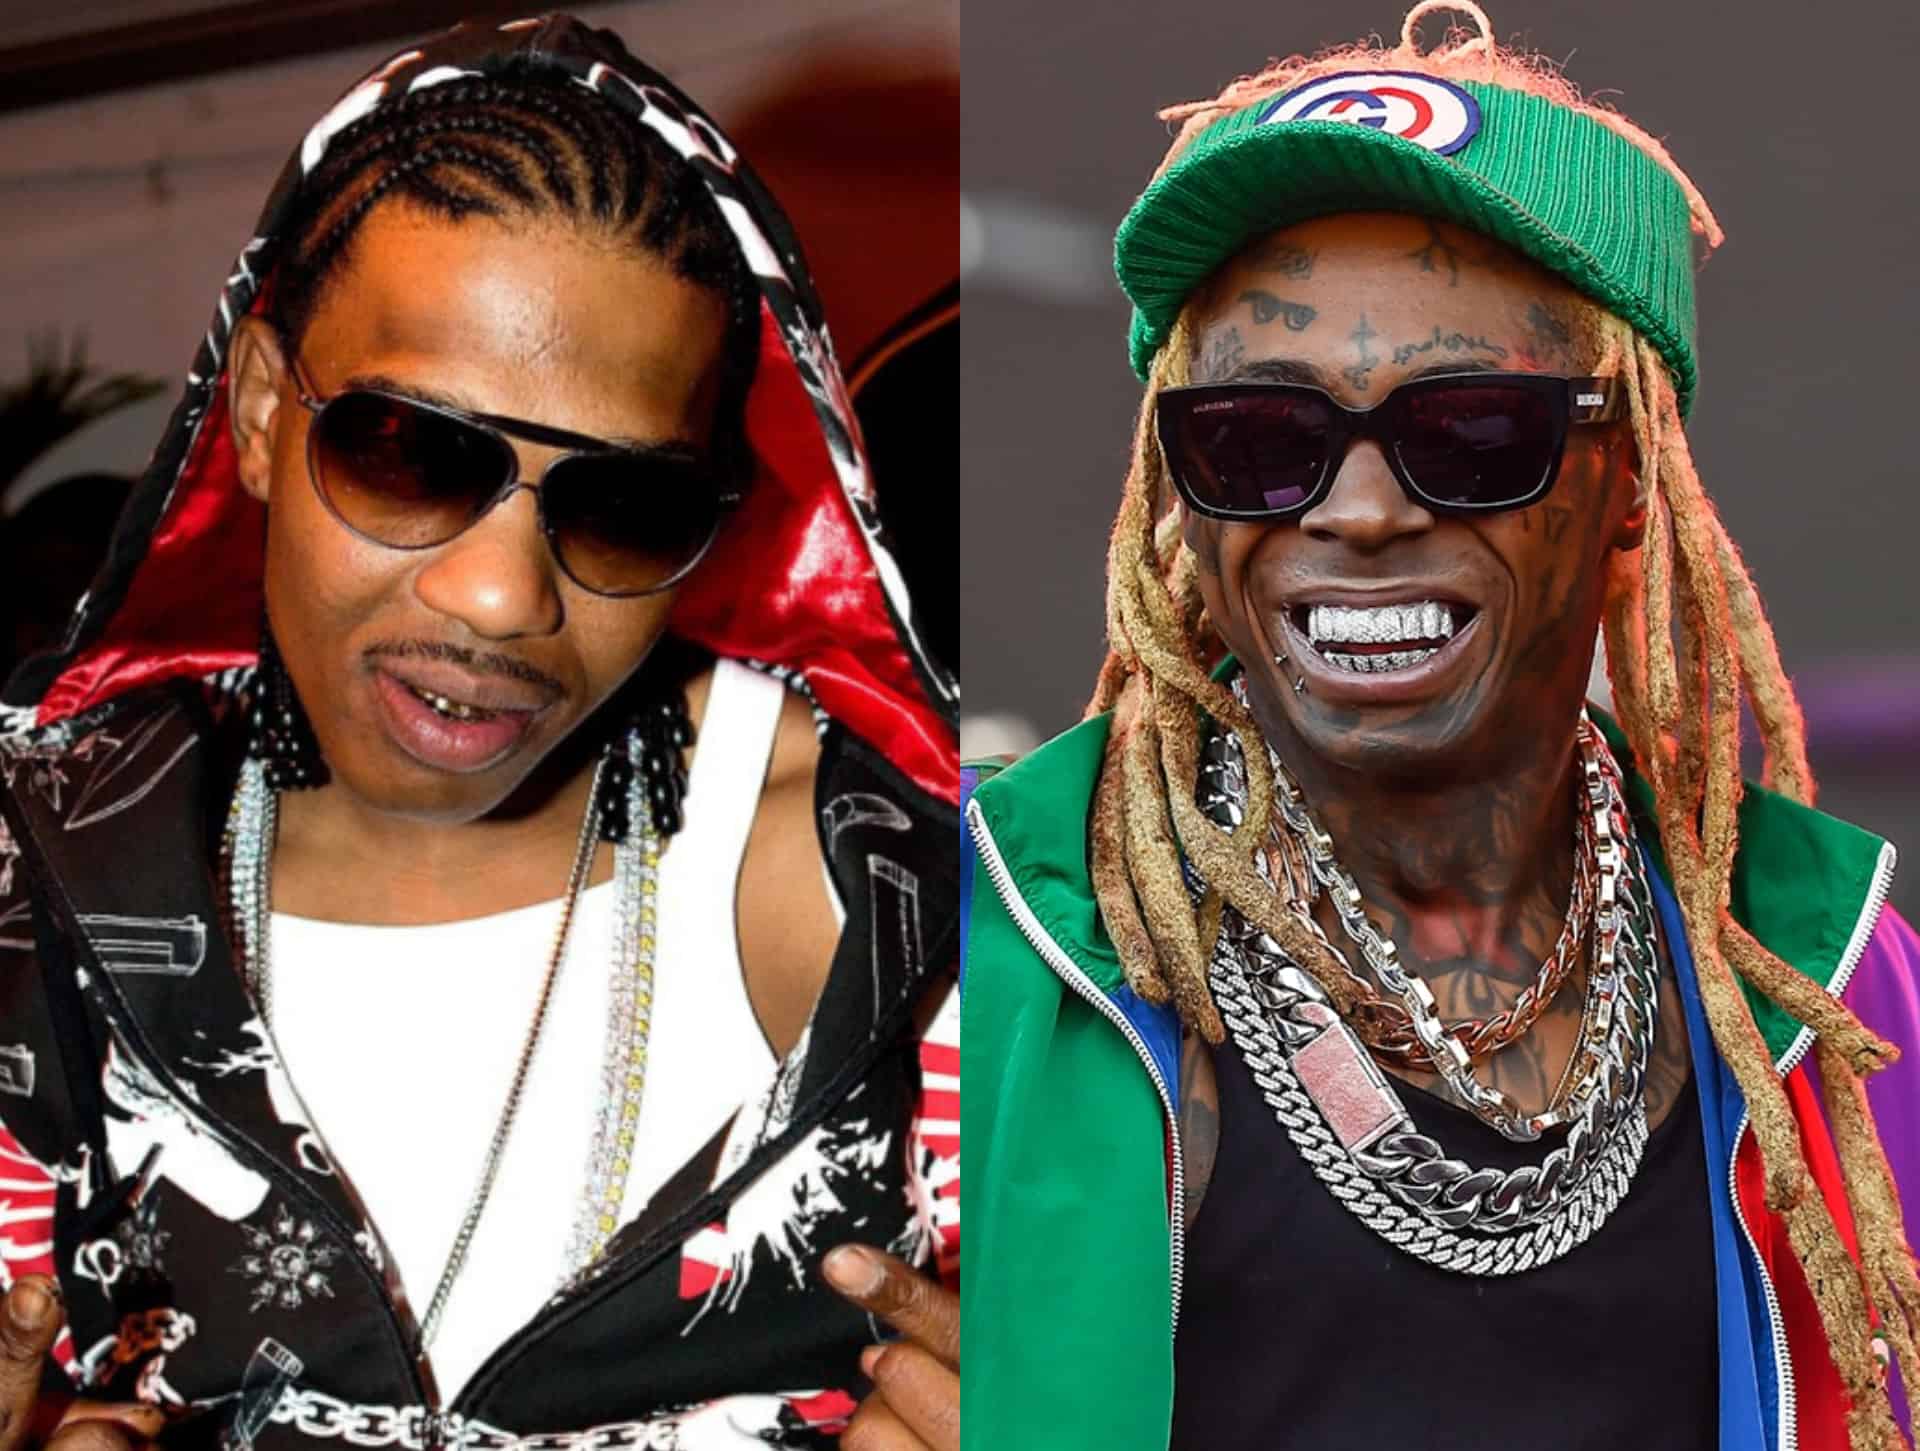 B.G. Says He Talked To Lil Wayne After Dissing Him On New Song